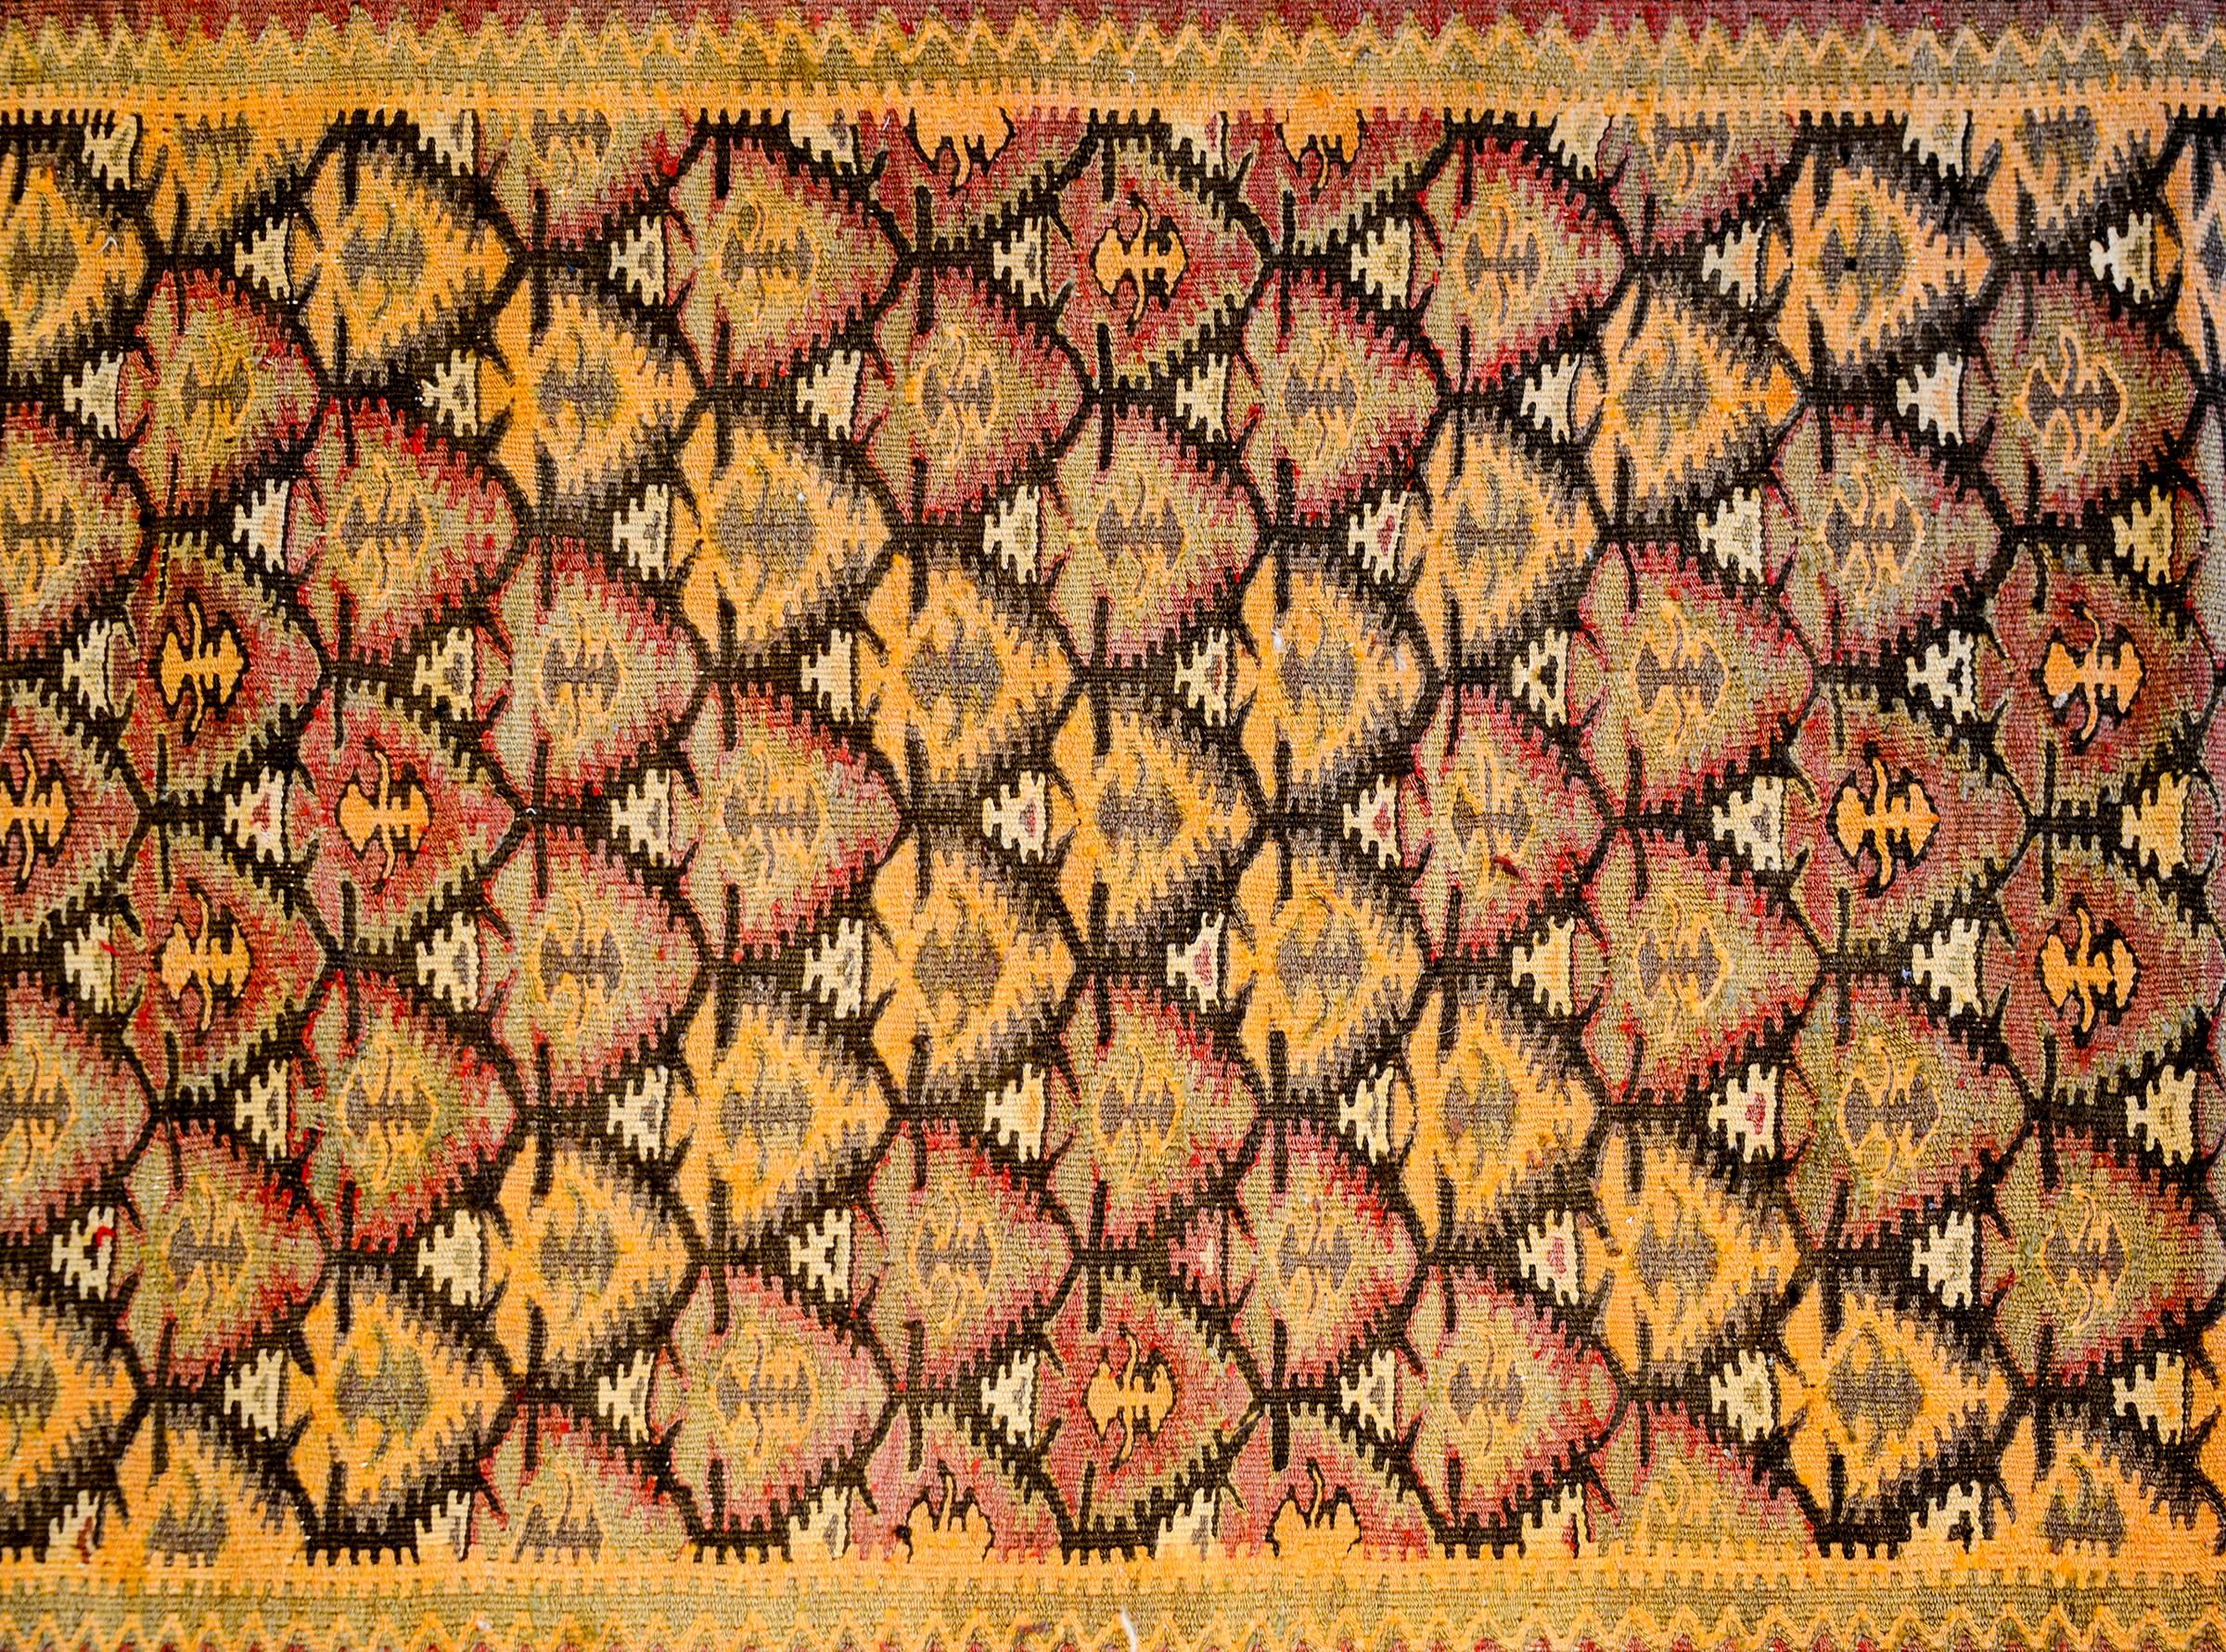 A Classic early 20th century Persian Qazvin Kilim runner with an all-over orange, purple, black and white tree-of-life pattern surrounded by multiple geometric patterned border. The central border is white with multicolored stylized flowers, flanked